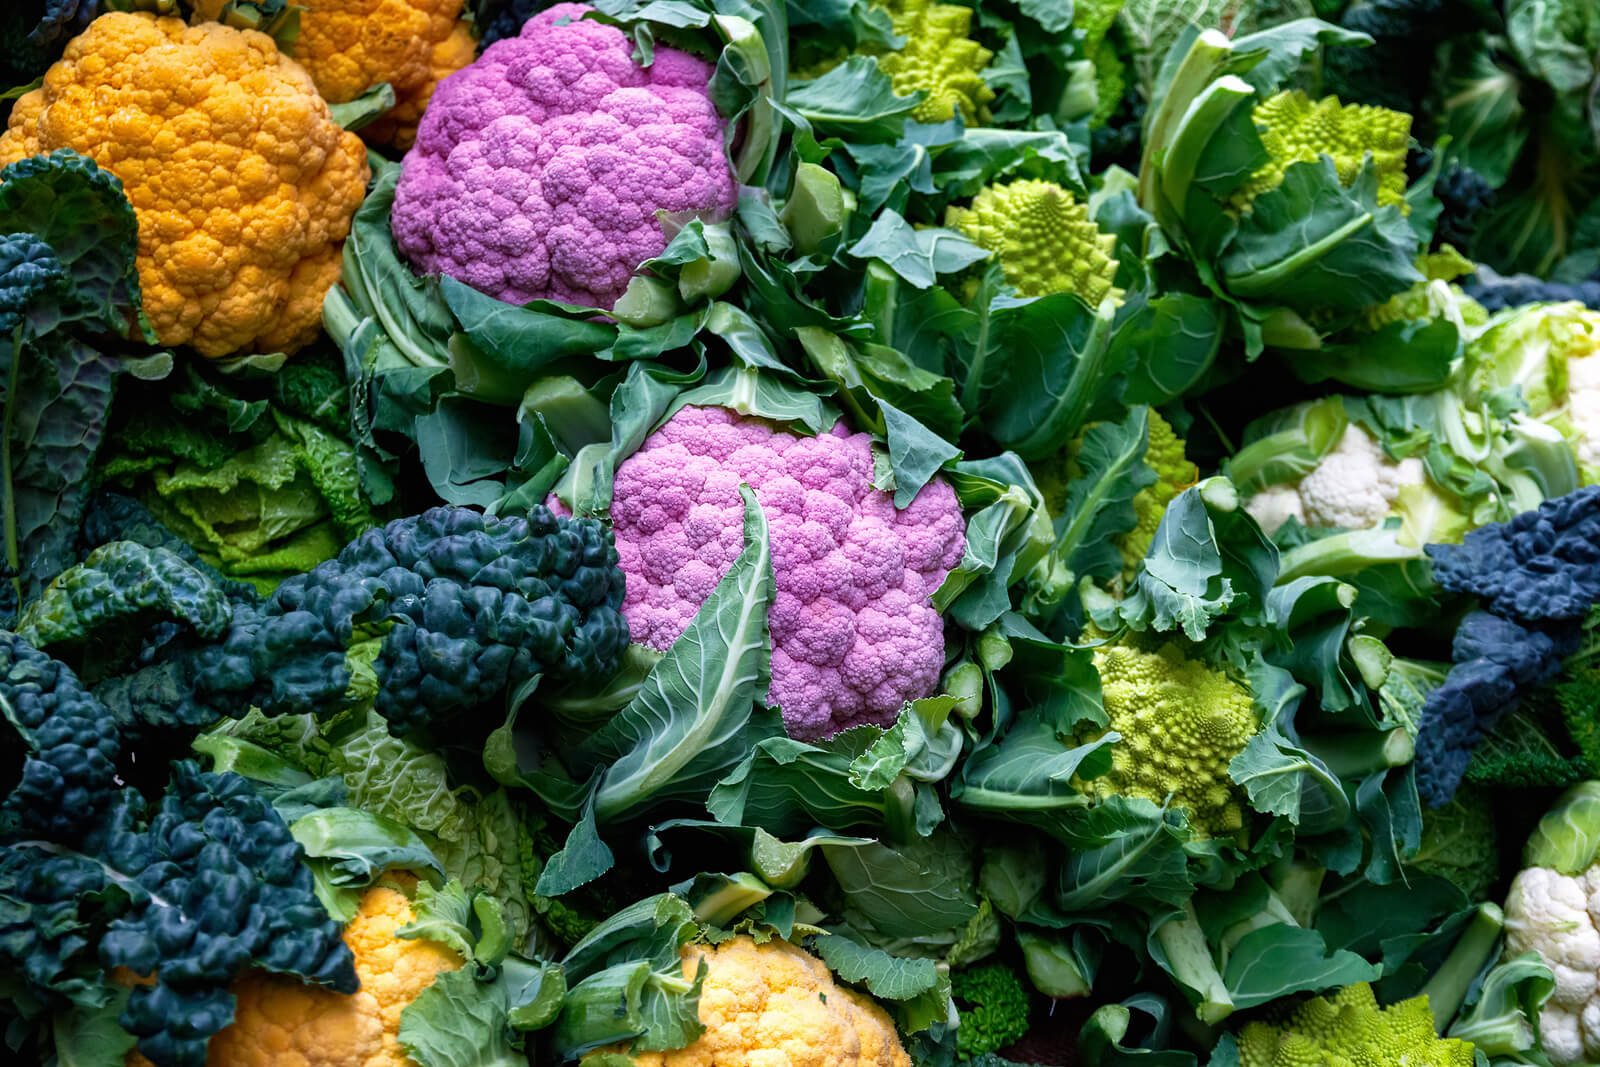 Broccoli vs. Cauliflower: Which Should You Choose for Health?